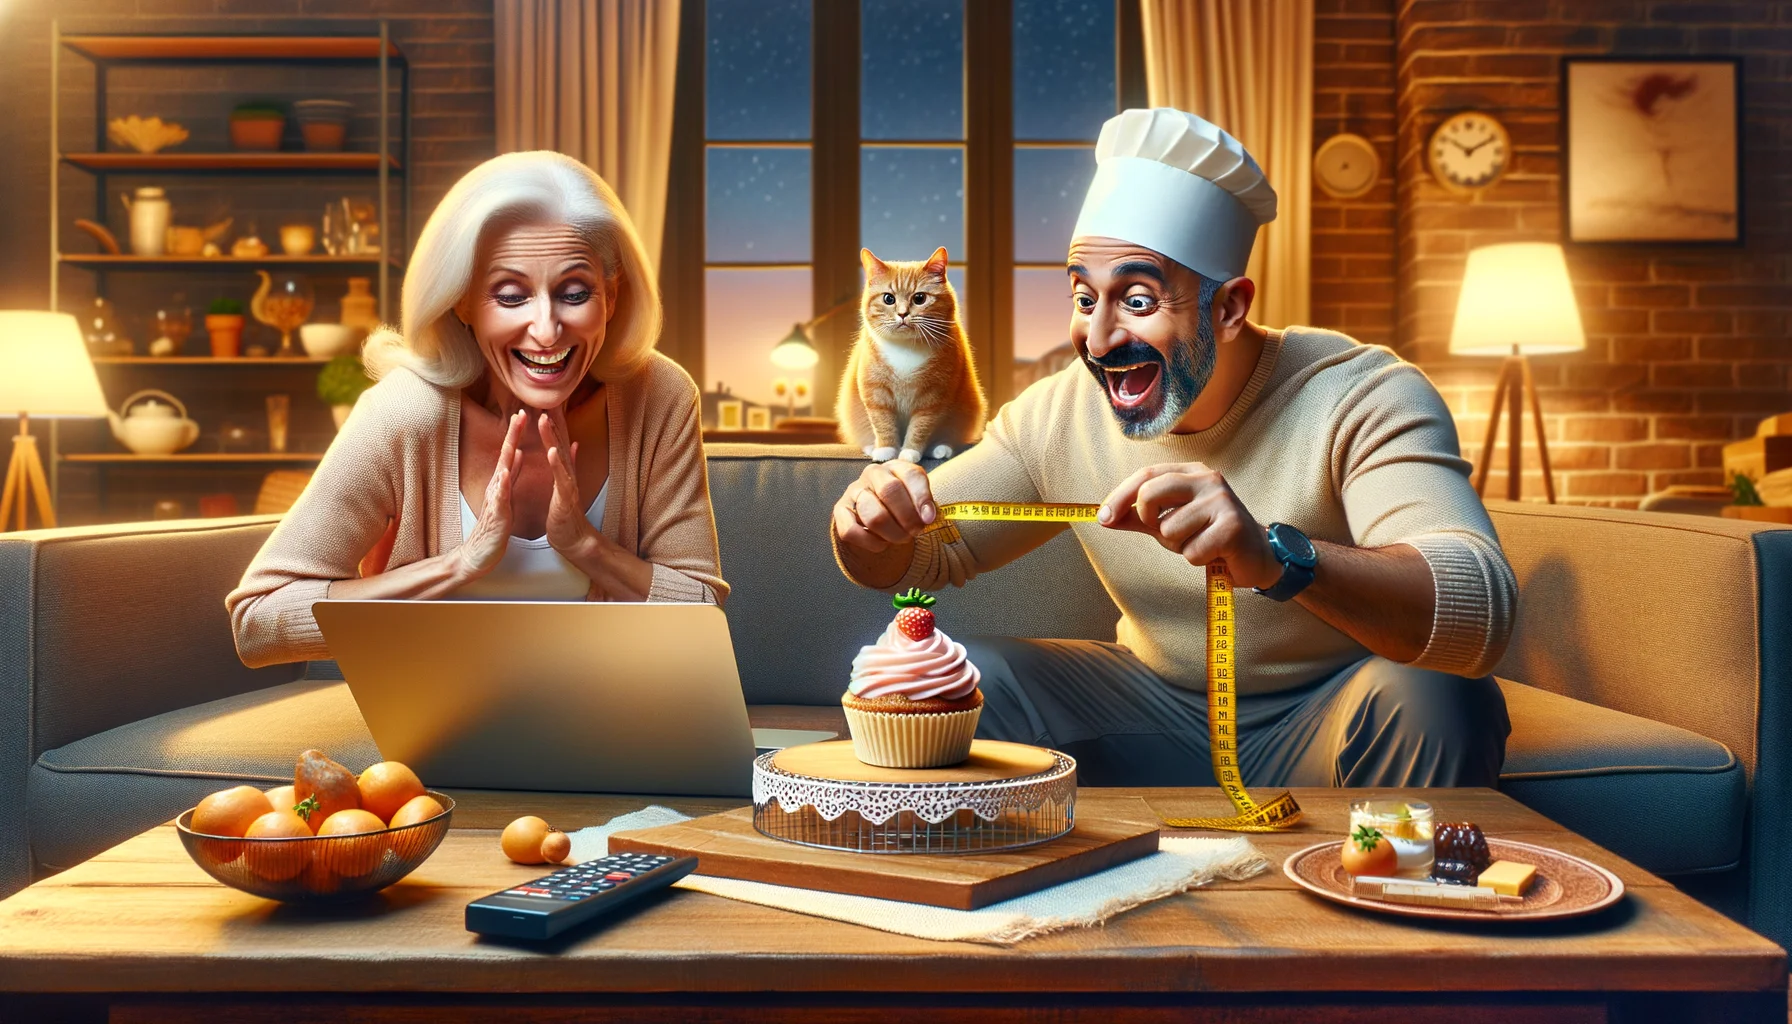 Create a humorous and realistic scene of a couple ordering low calorie sweets online. Picture a homey living room with a warm ambiance. A middle-aged Caucasian woman is cheerily browsing options on a laptop on a wooden coffee table, while a Middle-Eastern man, with an expression of surprise, is measuring a tiny miniature cupcake placed atop a measuring tape. Their orange tabby cat watches attentively from the back of the couch. Ensure that the website on the laptop showcases various low-calorie dessert items, and that the overall setting is inviting and creates a positive atmosphere.